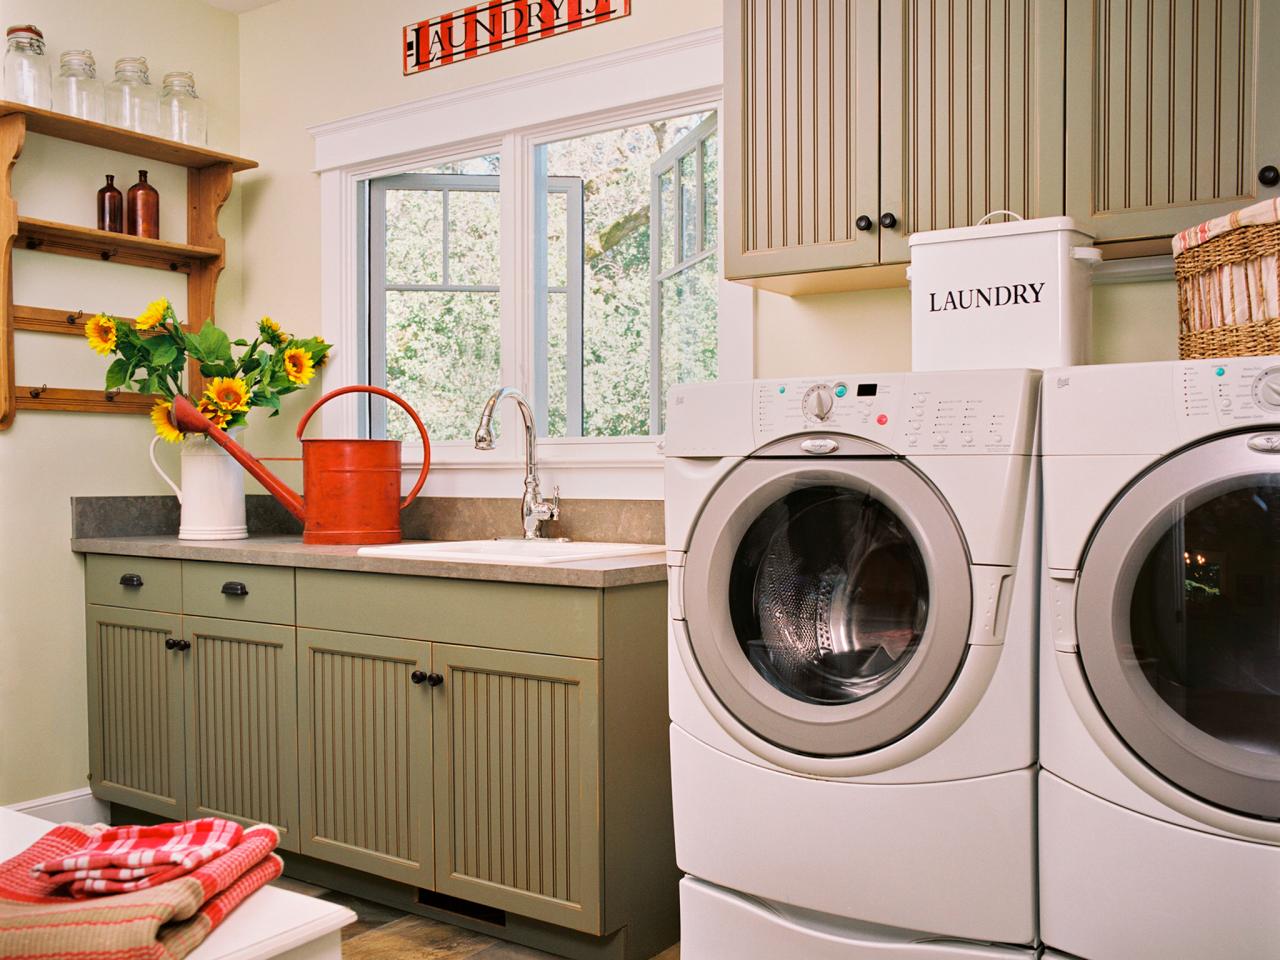  Laundry Room Makeover Ideas  Pictures Options Tips 